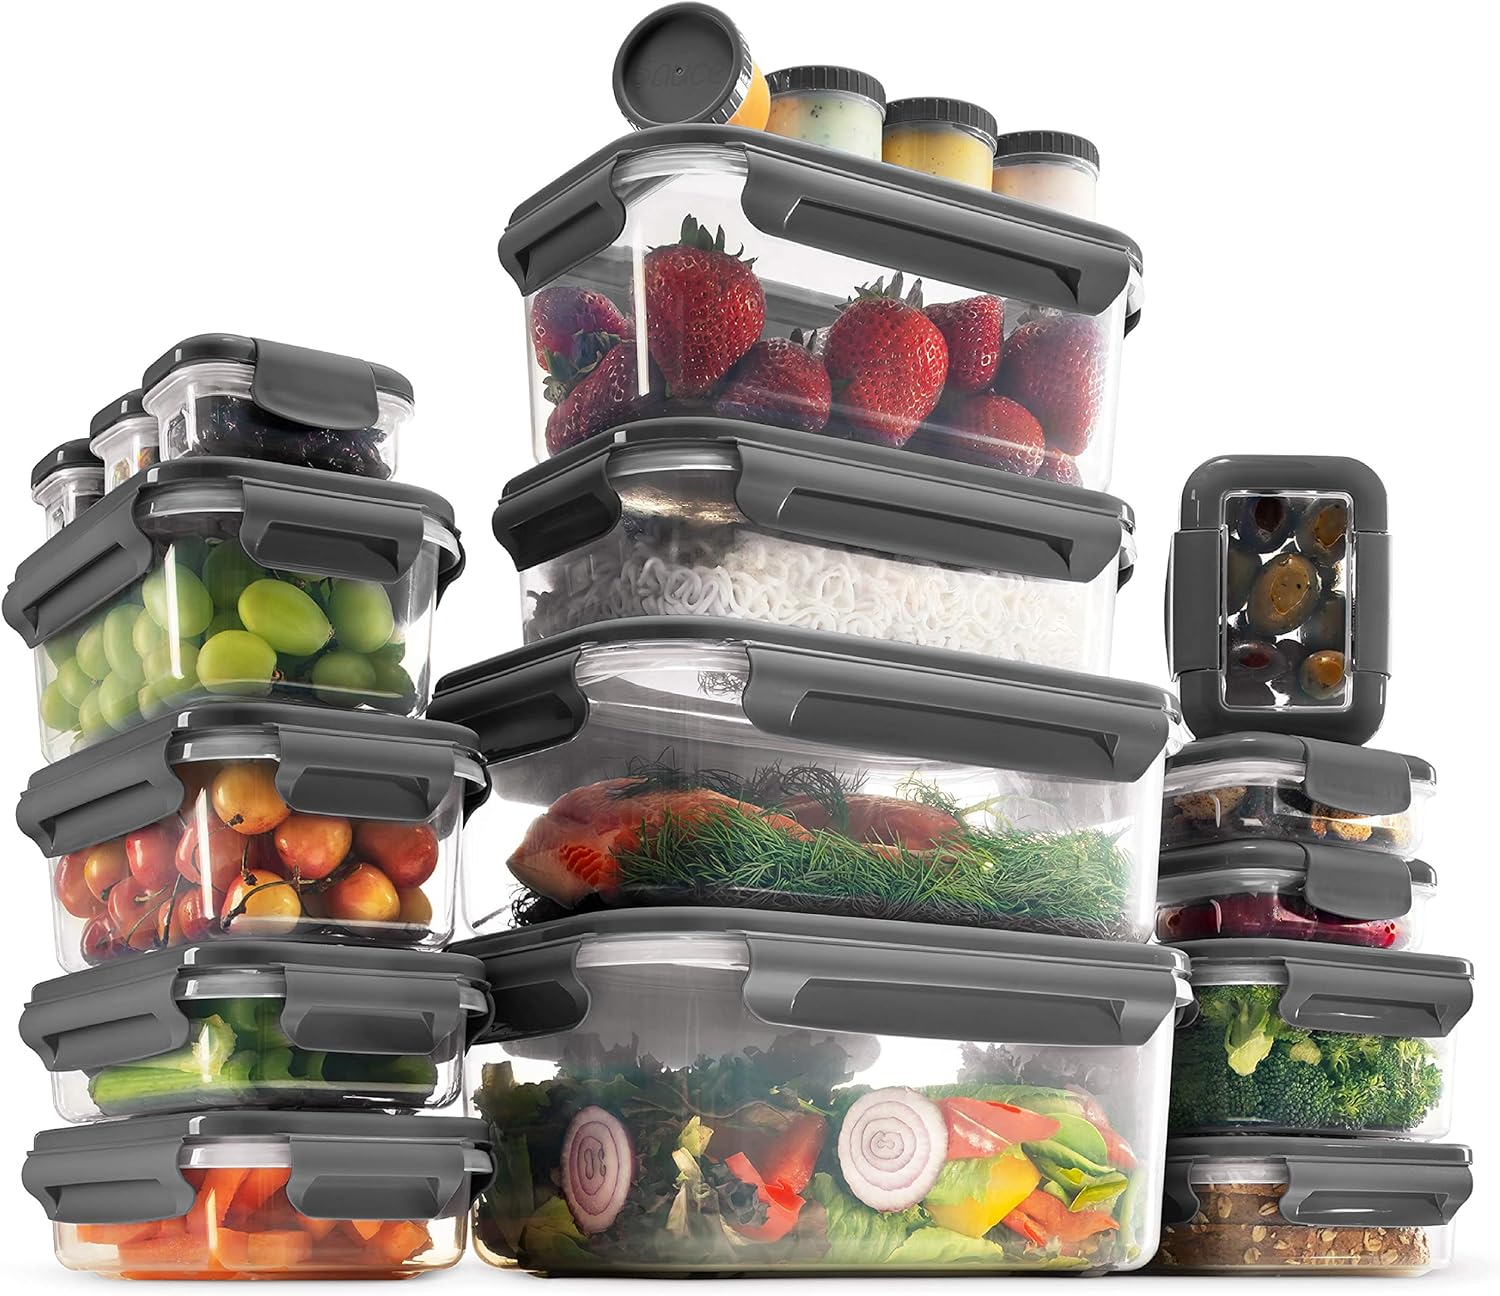 Food Storage Containers With Lids, 40-Piece Airtight Leakproof, BPA-Free Durable Plastic Food Containers for Leftovers - Freezer, Microwave & Dishwasher-Safe (Gray)